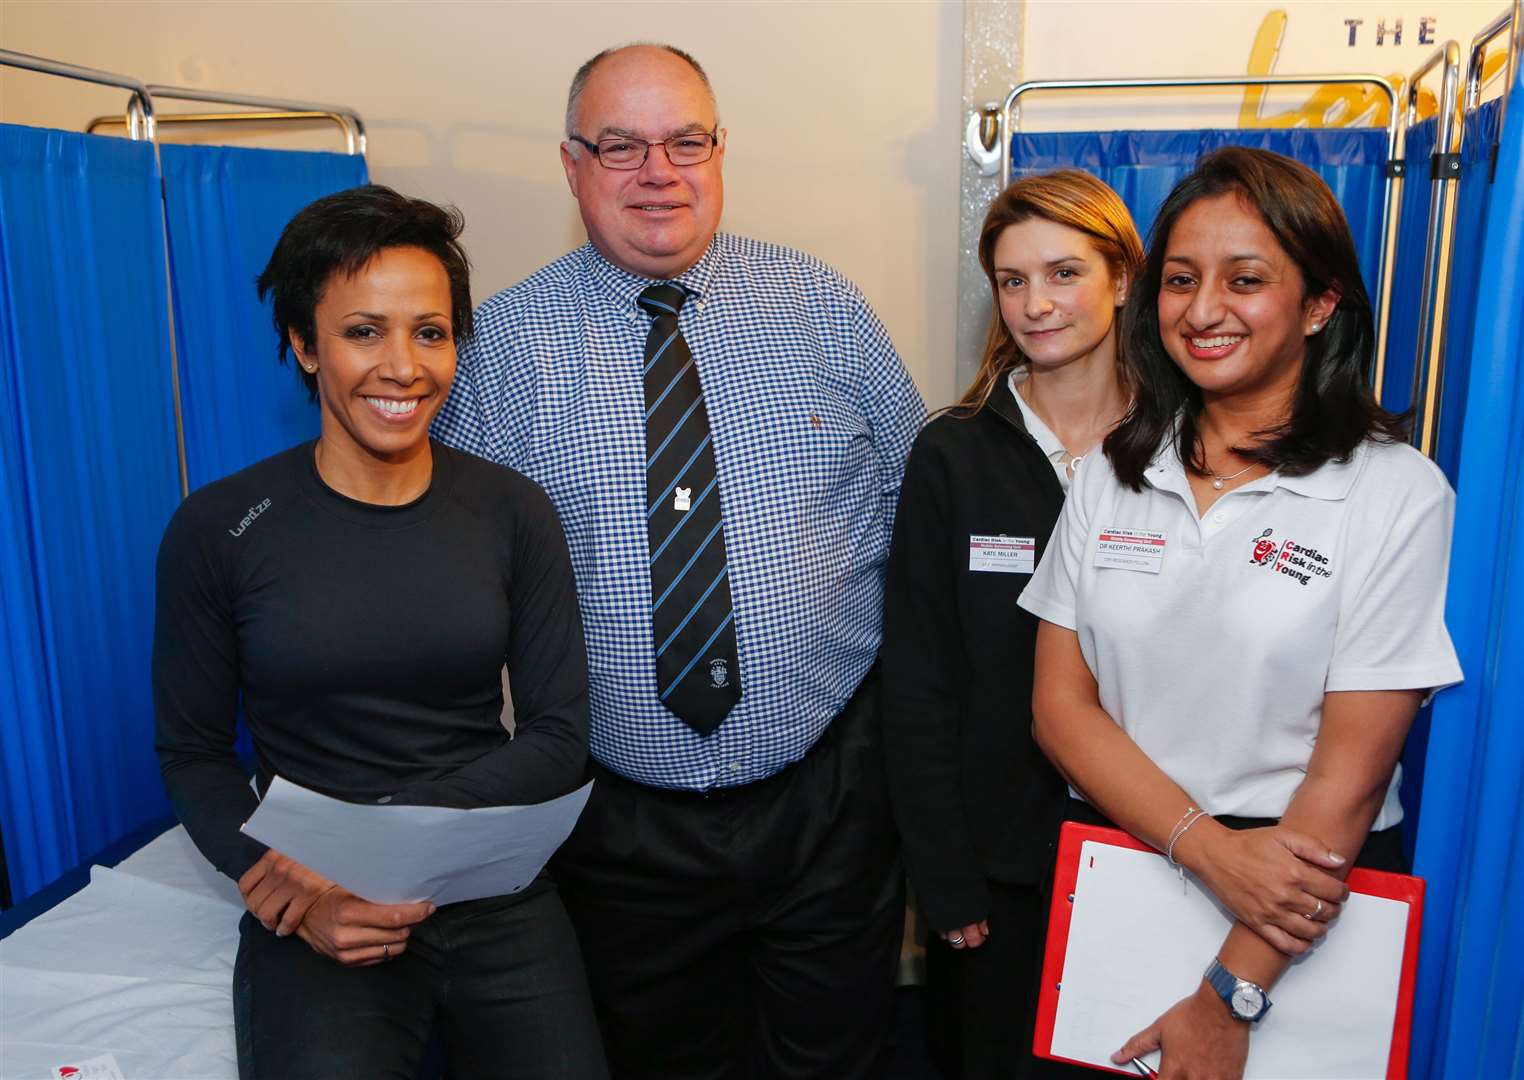 Kelly Holmes at the first heart screening day Tonbridge Angels put on in January 2016. She is pictured with Steve Churcher, then-chairman of Tonbridge Angels, Kate Miller, ECG Technician, and Dr Keerthi Prakash. Picture: Matthew Walker